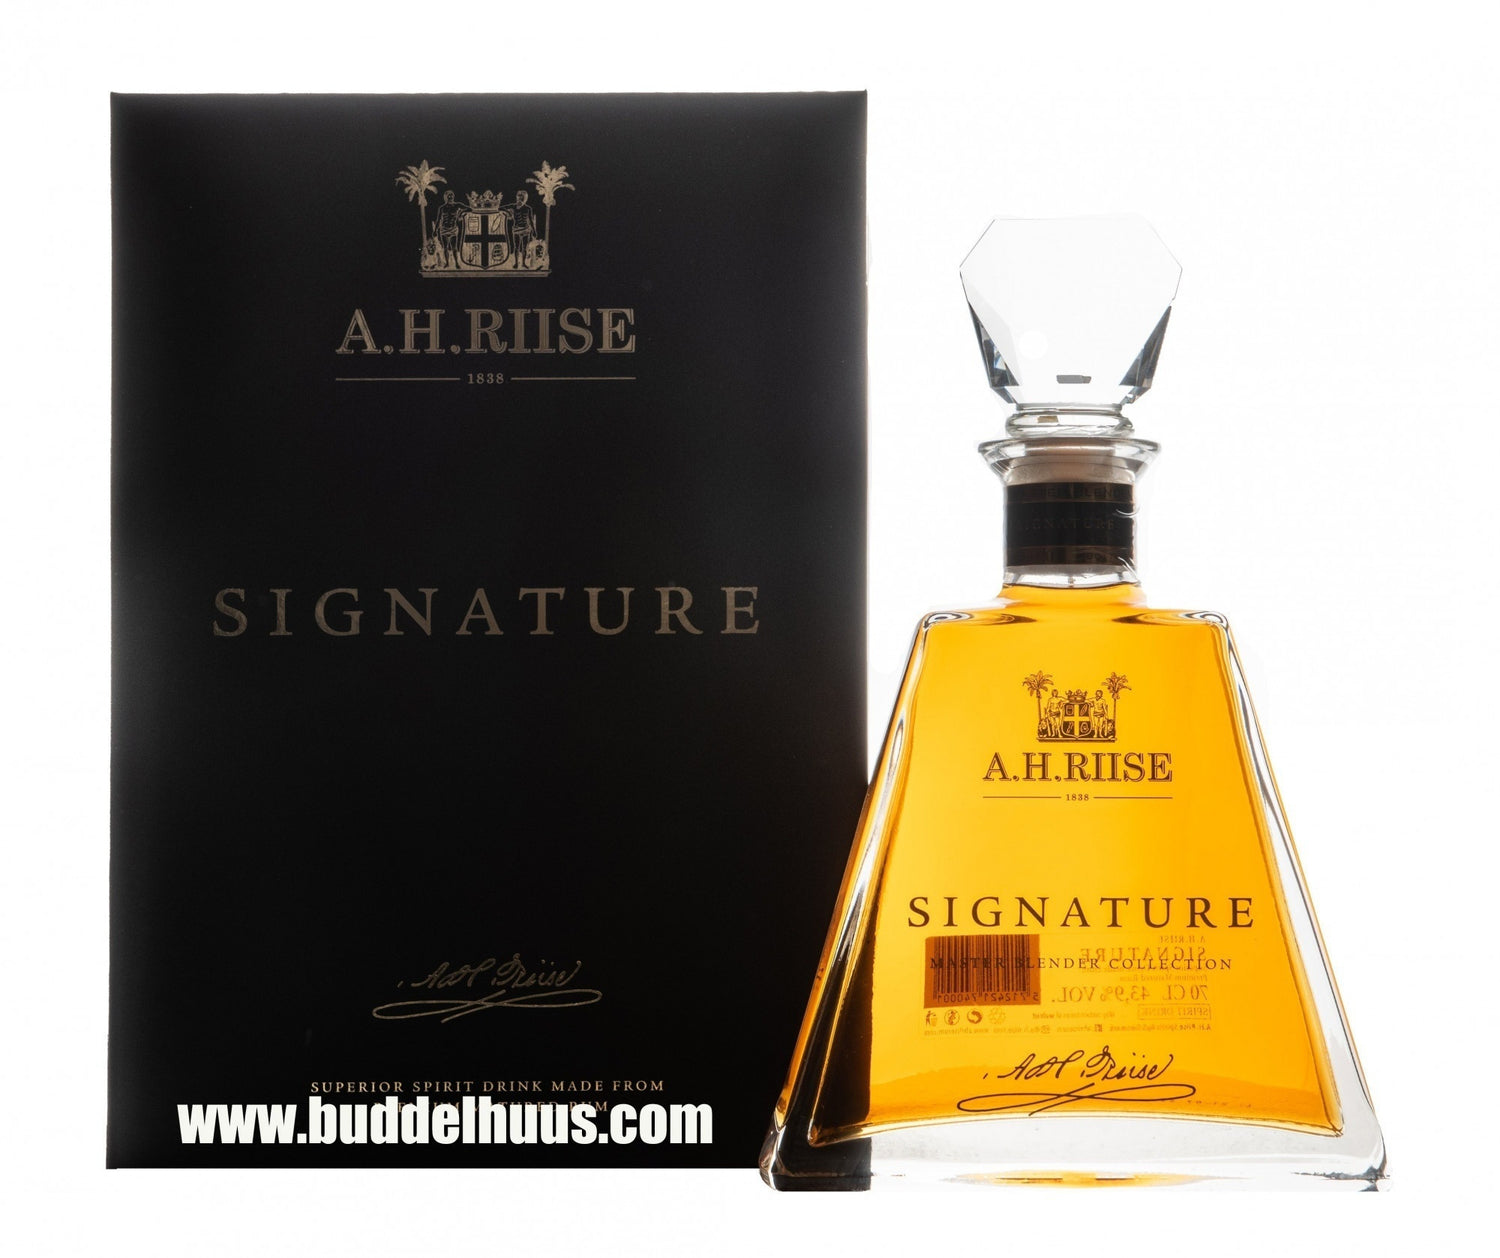 A.H. Riise Signature Master Blender Collection